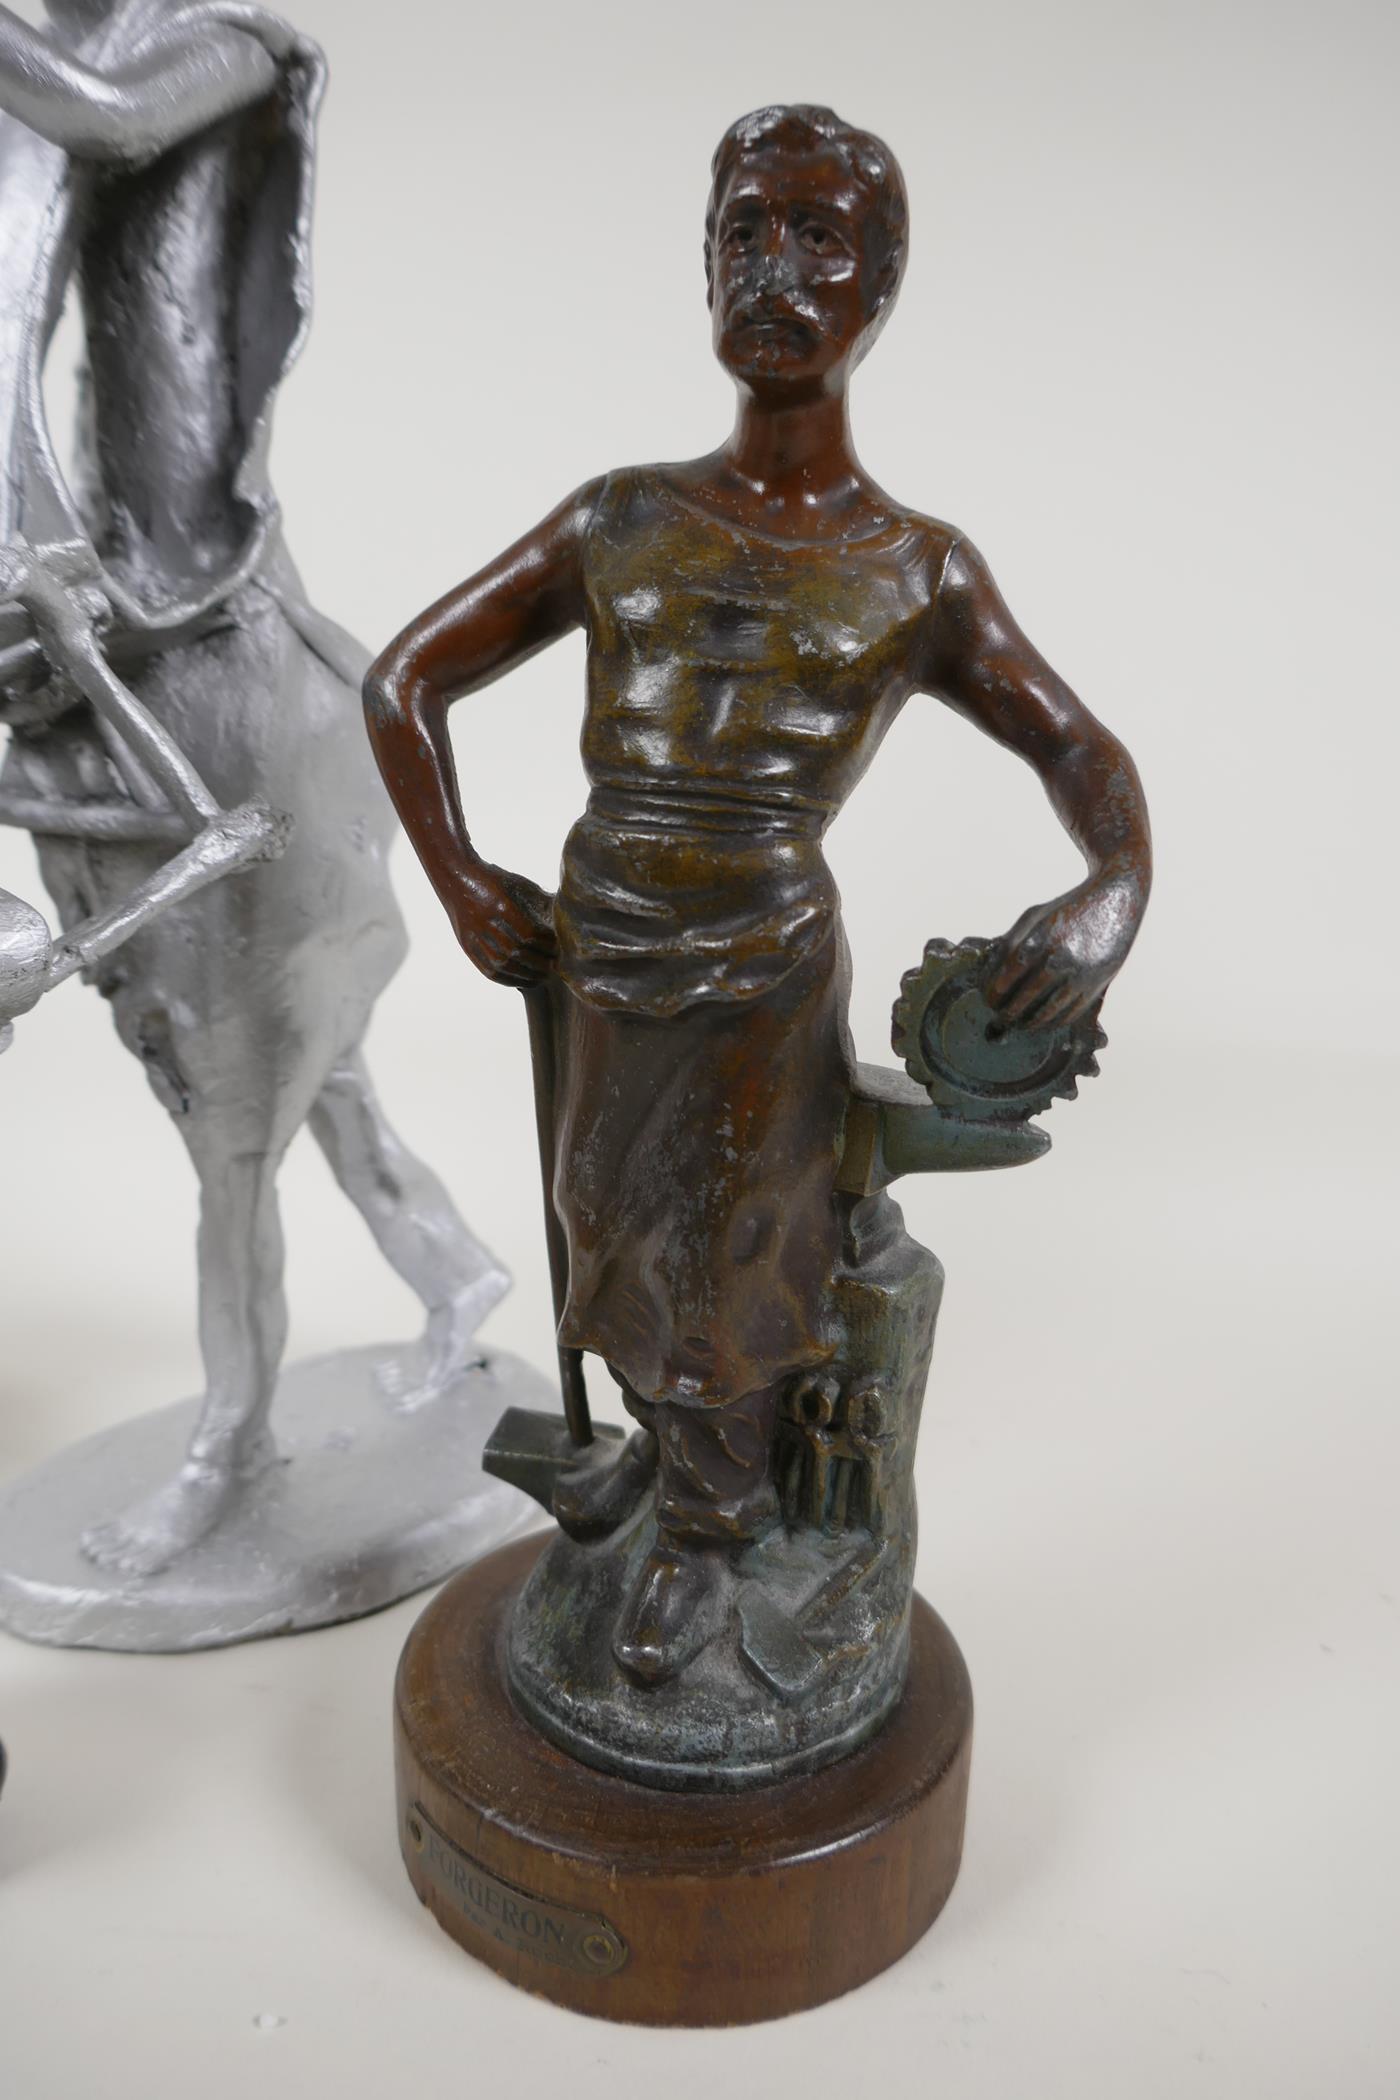 A bronzed spelter figure of a foundry worker, and iron trick train money box, a painted metal figure - Image 2 of 5